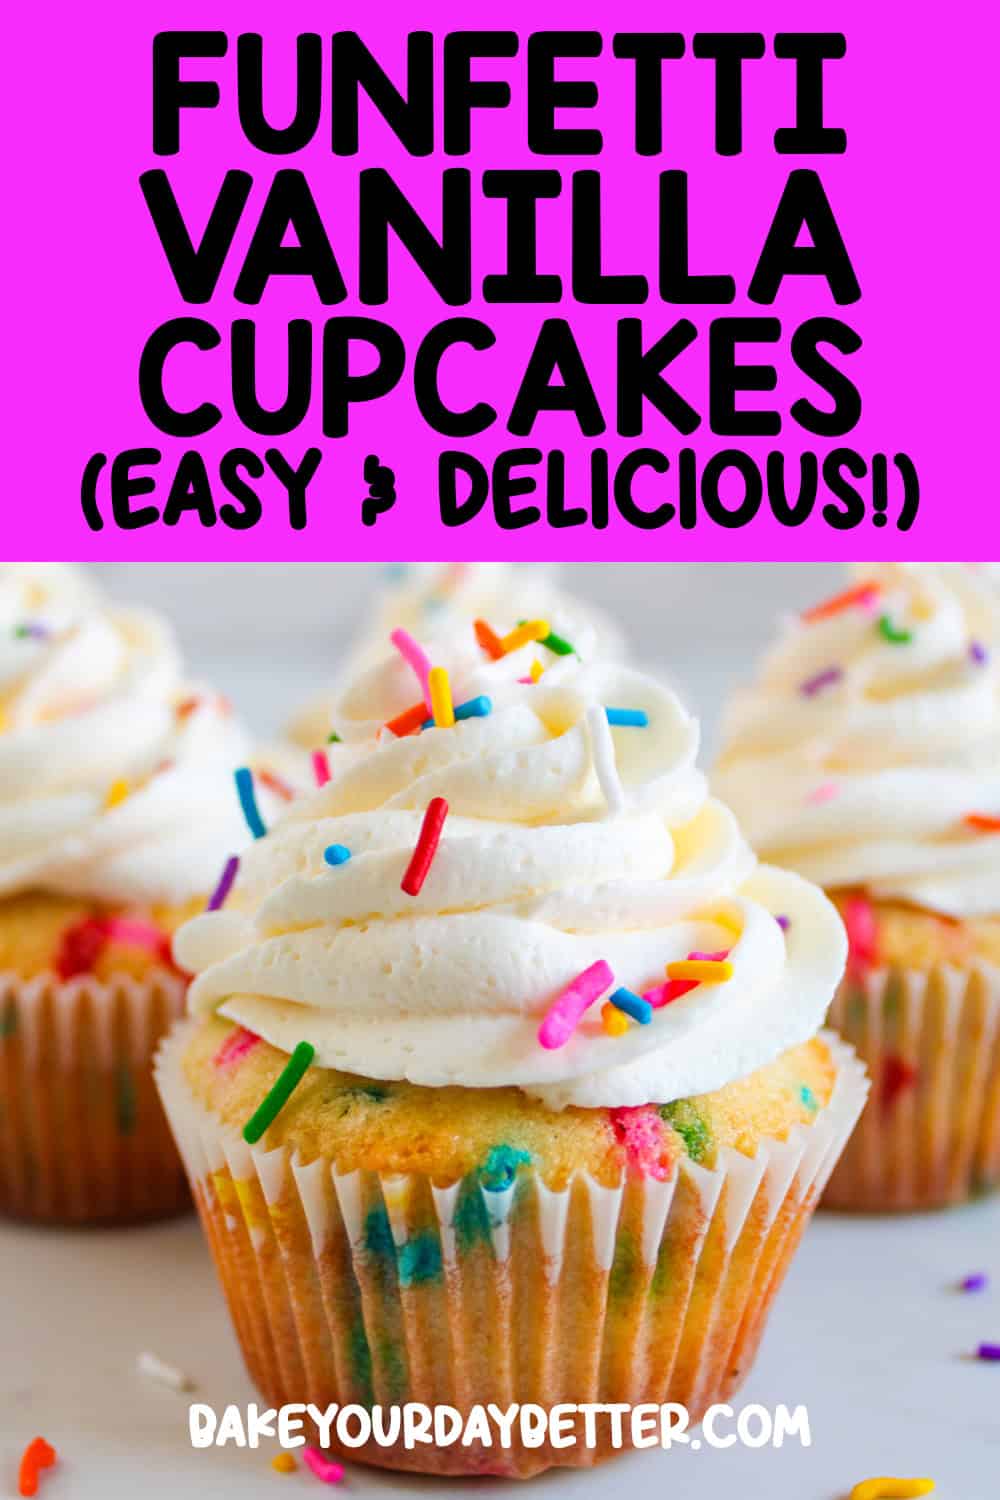 picture of funfetti vanilla cupcakes with text overlay that says: funfetti vanilla cupcakes (easy and delicious!)